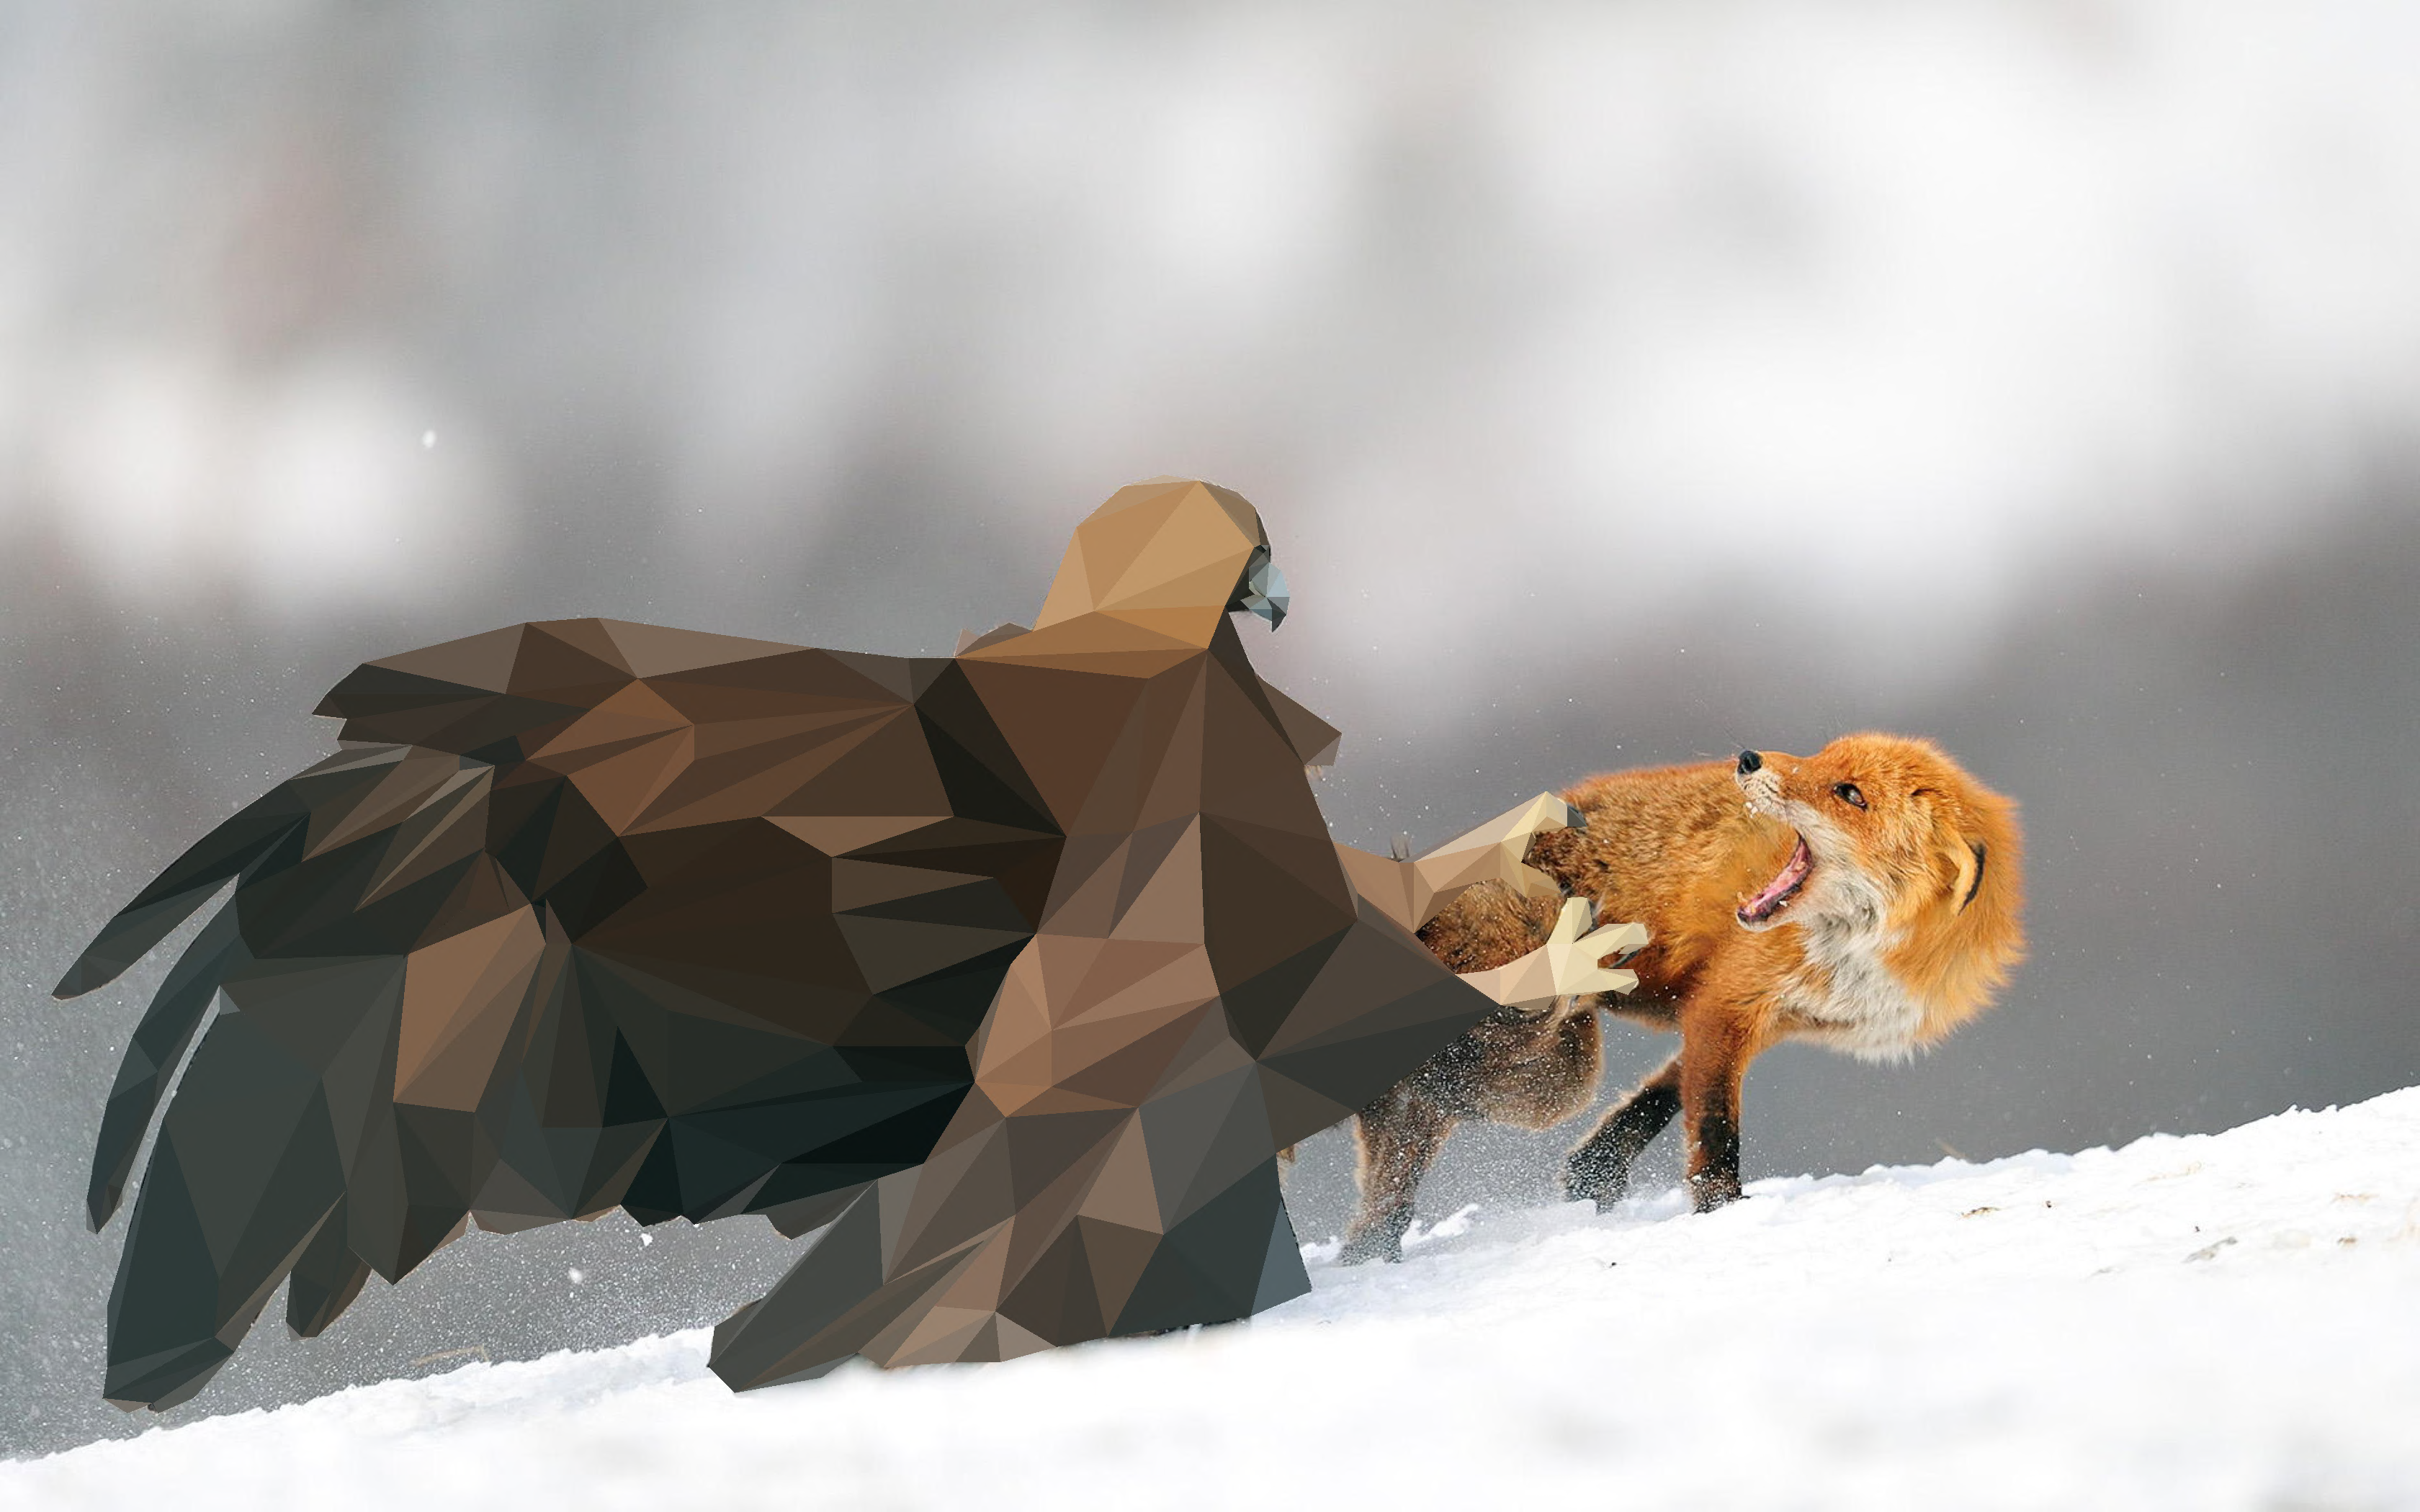 Low-poly Eagle Wallpaper I Made - Golden Eagle Eating Fox , HD Wallpaper & Backgrounds